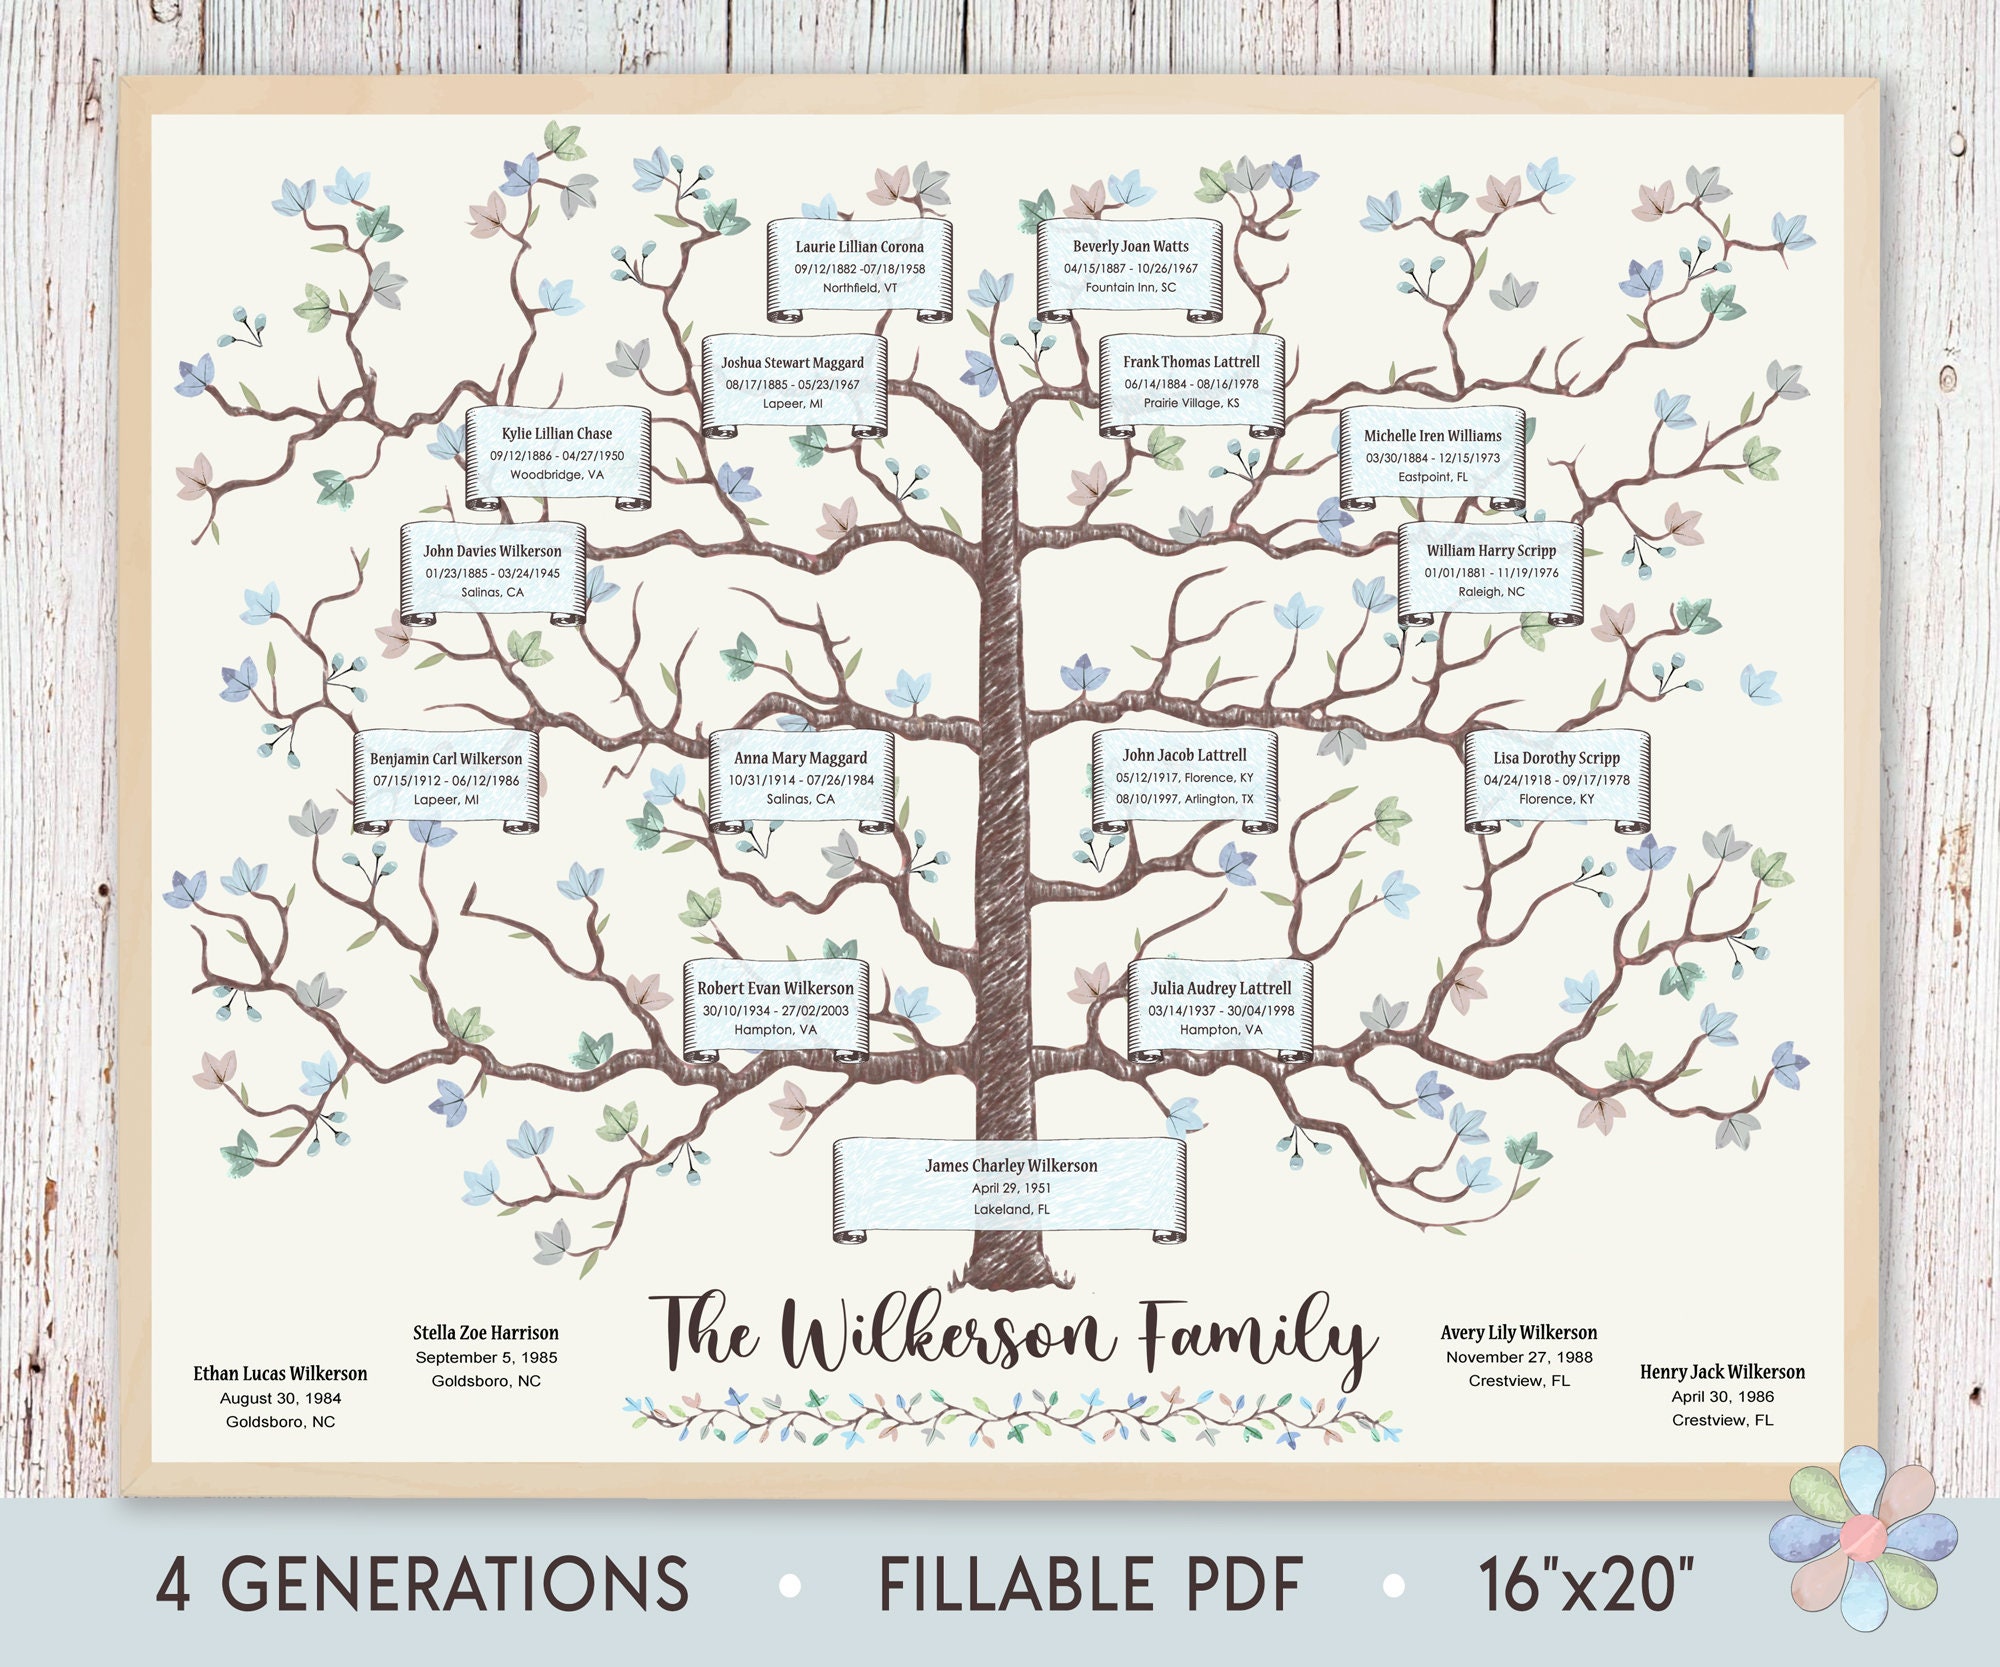  Veemoon Blank Pedigree Chart Family Tree Charts to Fill in  Genealogy Geneology Organizer Book Ancestry Family Tree Descendant Family  Tree Maker Family Chart Filling Canvas Gift Generation: Posters & Prints